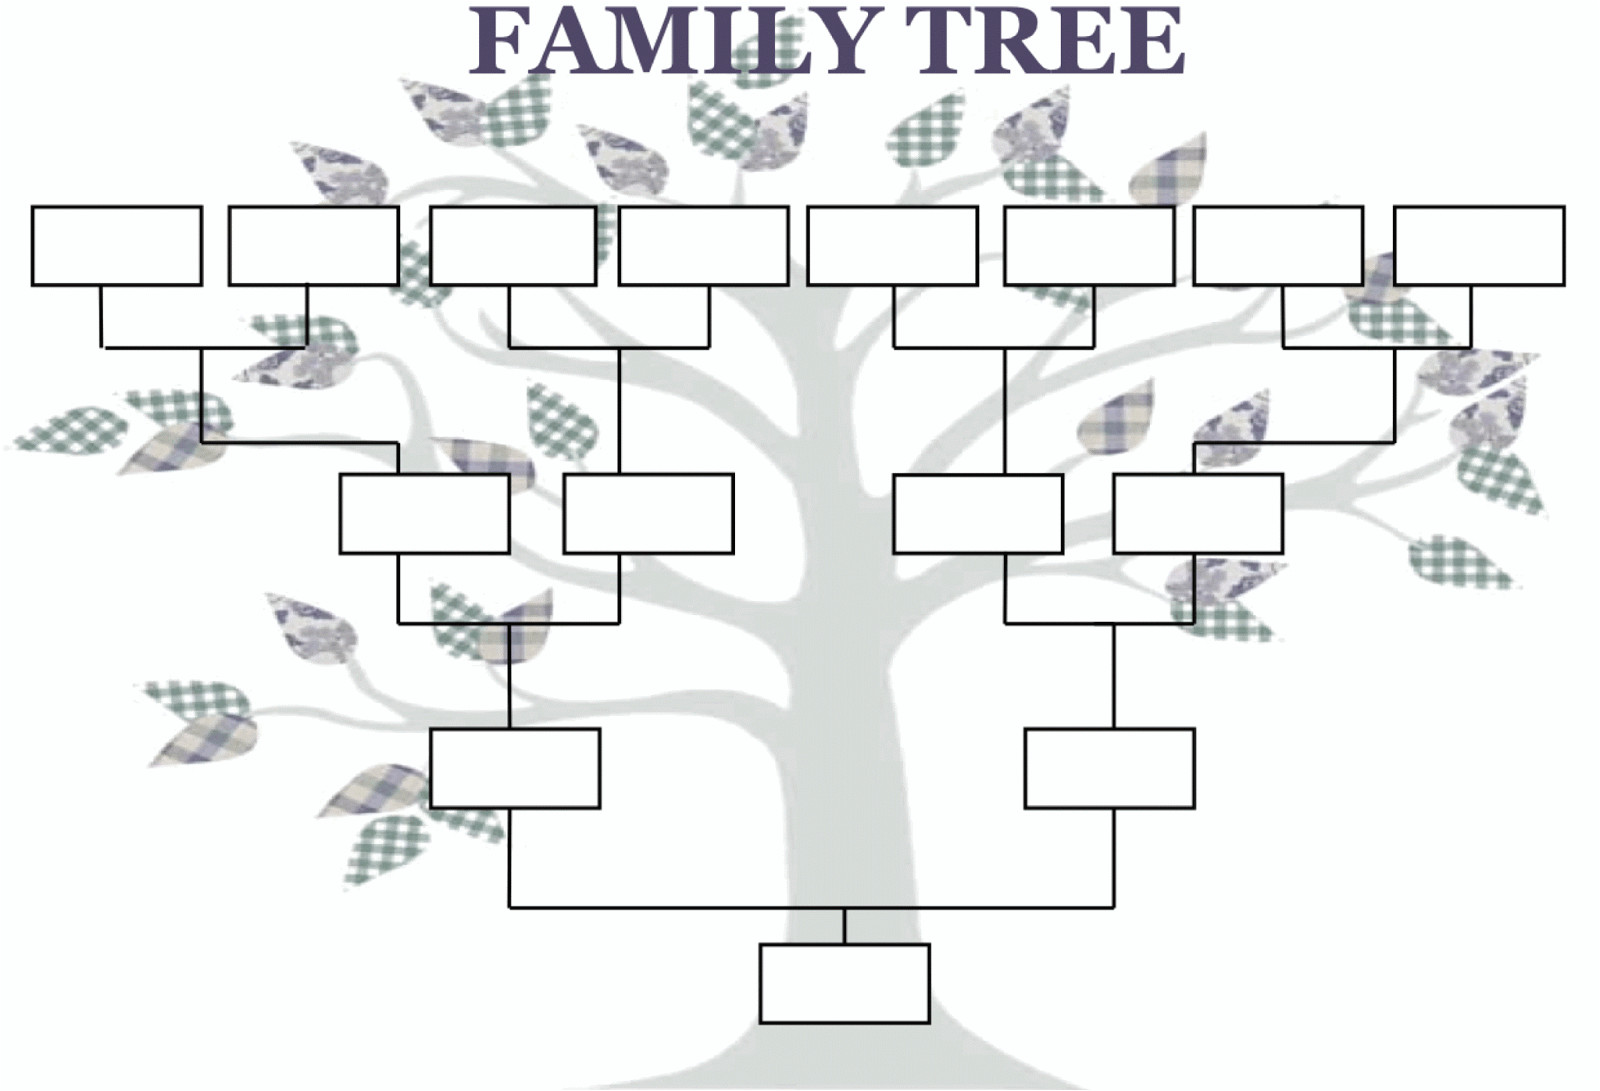 character tree template relationship chart template family tree using character relationship chart template